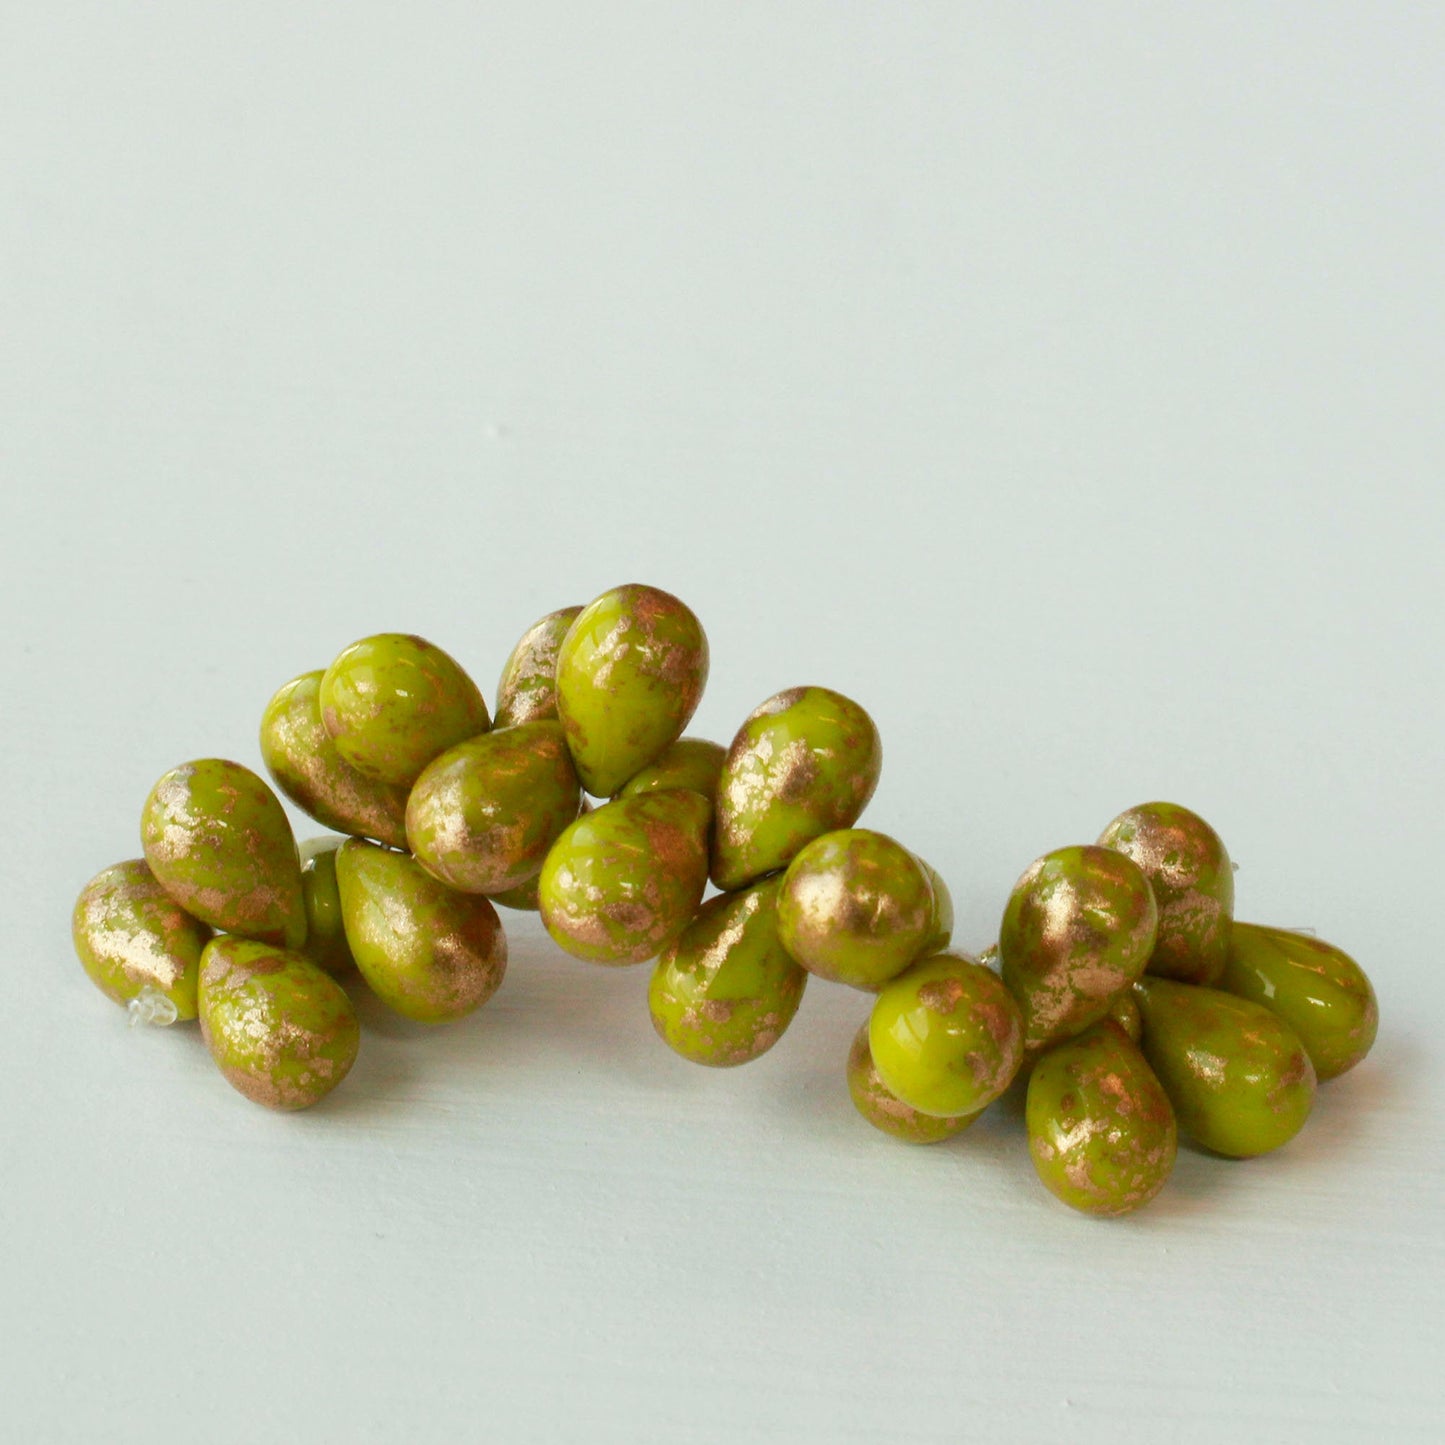 Load image into Gallery viewer, 6x9mm Glass Teardrop Beads - Avocado Green with Gold Dust - 25 Beads
